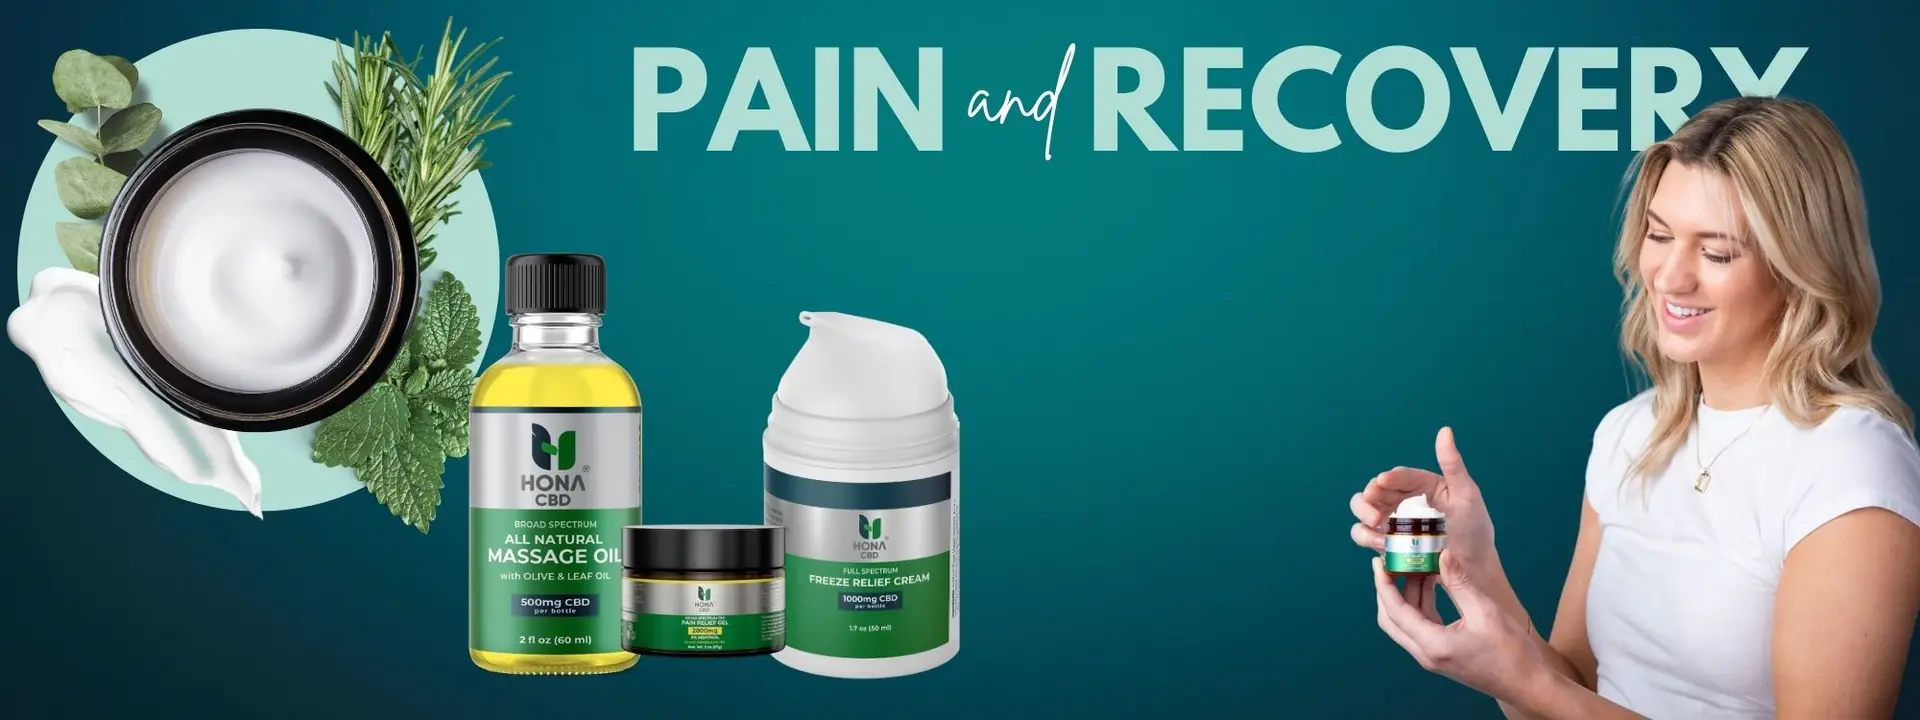 Pain and Recover Banner